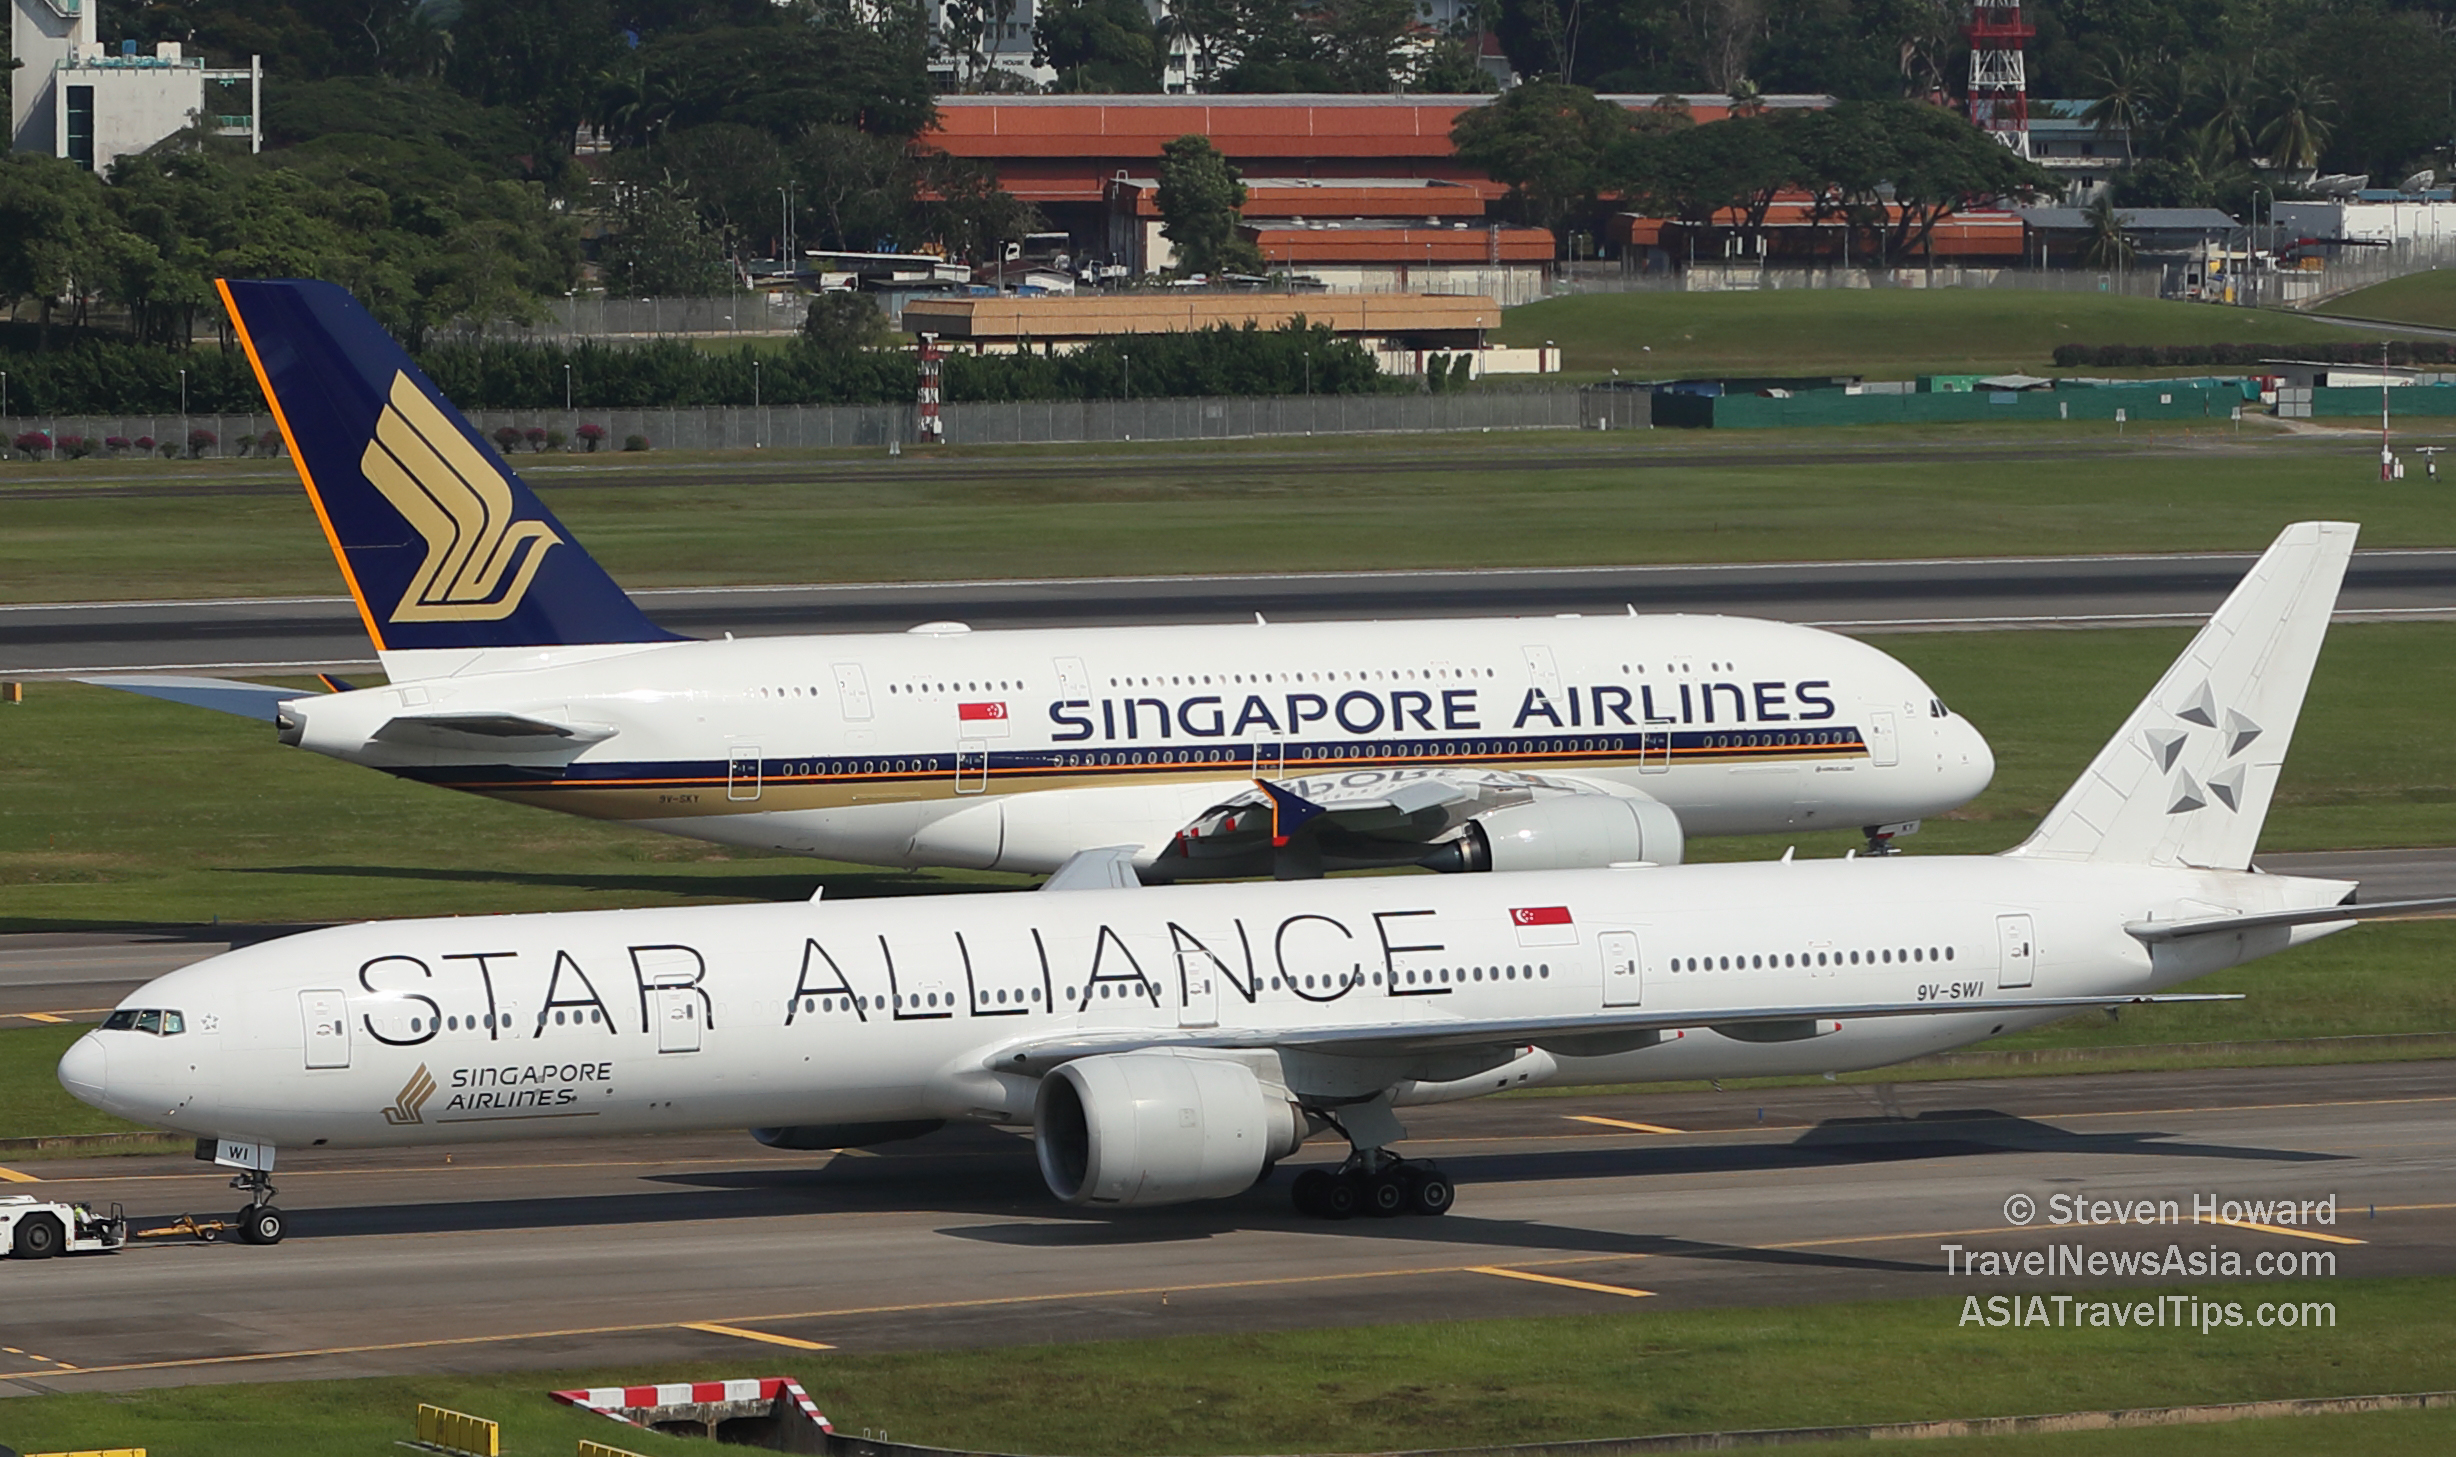 Singapore Airlines aircraft at Changi Airport. Picture by Steven Howard of TravelNewsAsia.com Click to enlarge.